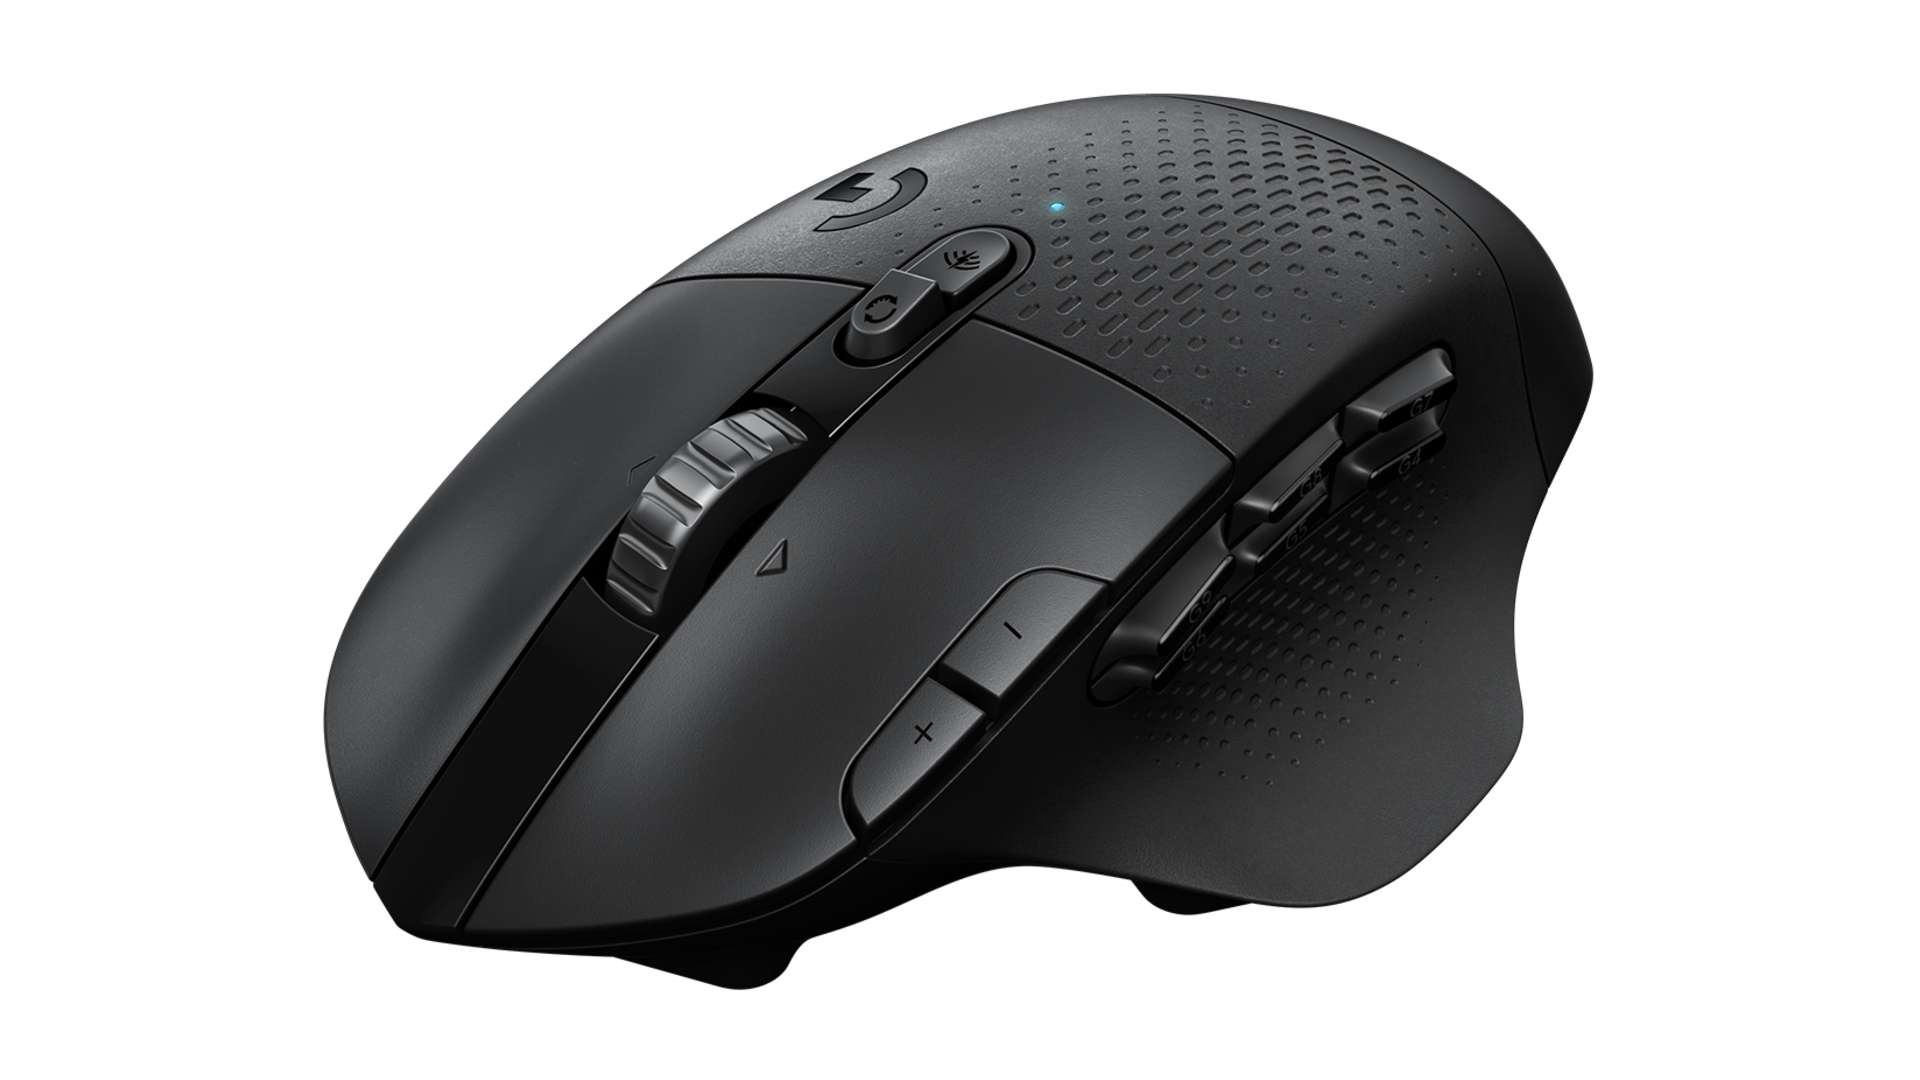 Get 40% off this wireless Logitech gaming mouse for MMO games